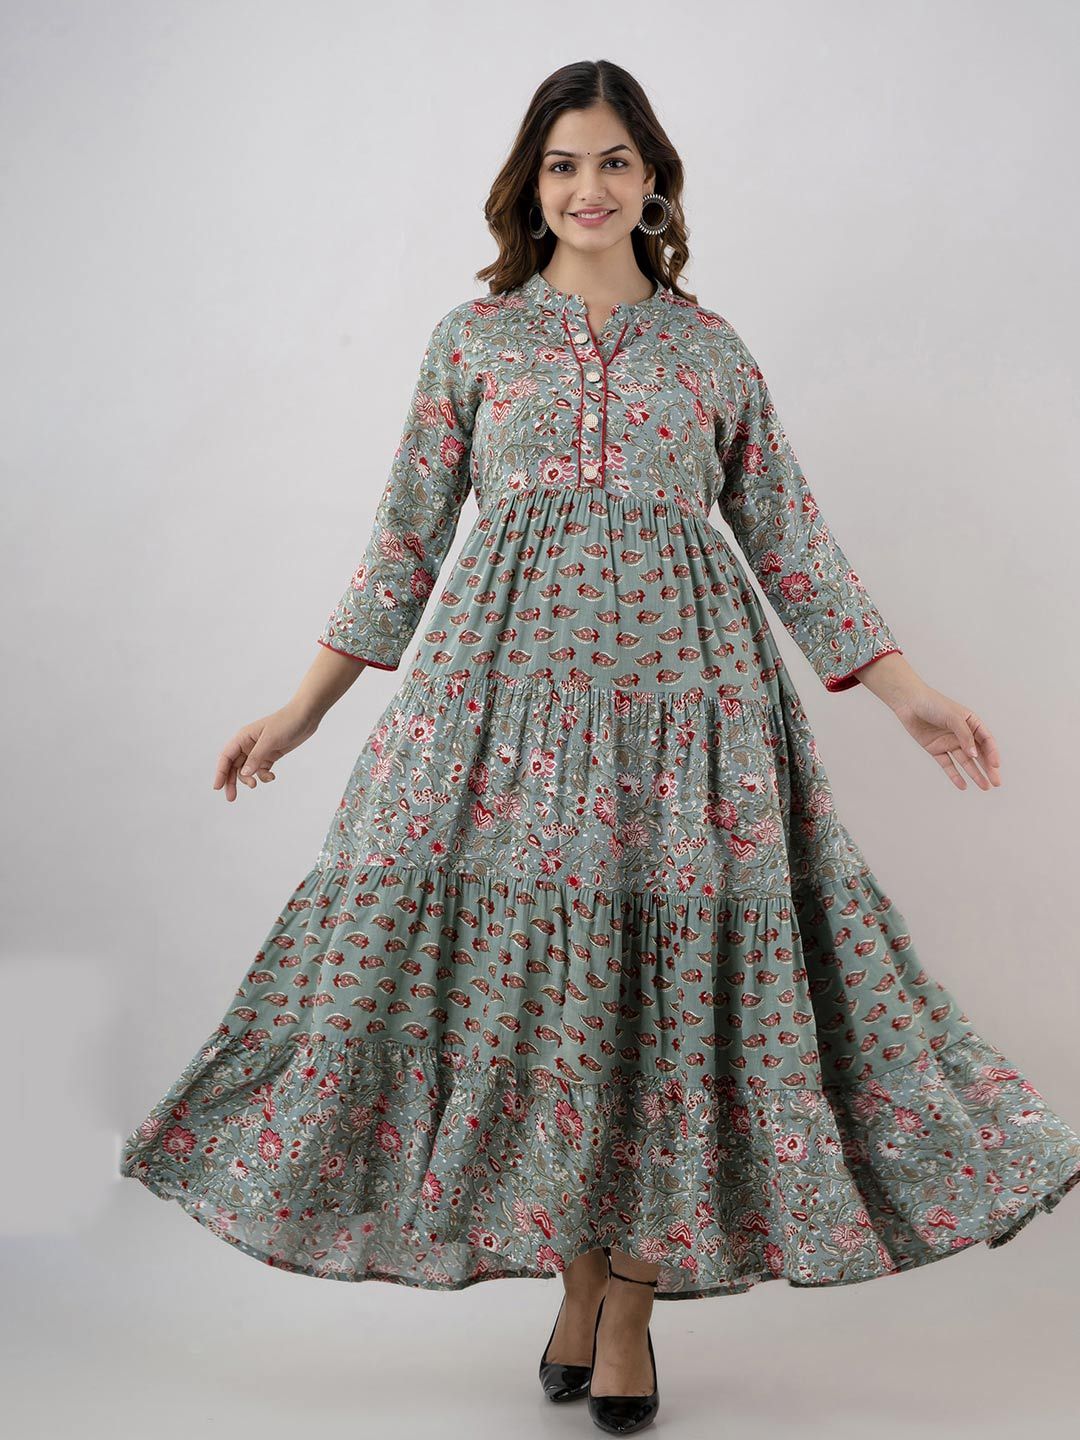 BAESD Grey & Multicoloured Floral Print Fit & Flare Dress Price in India